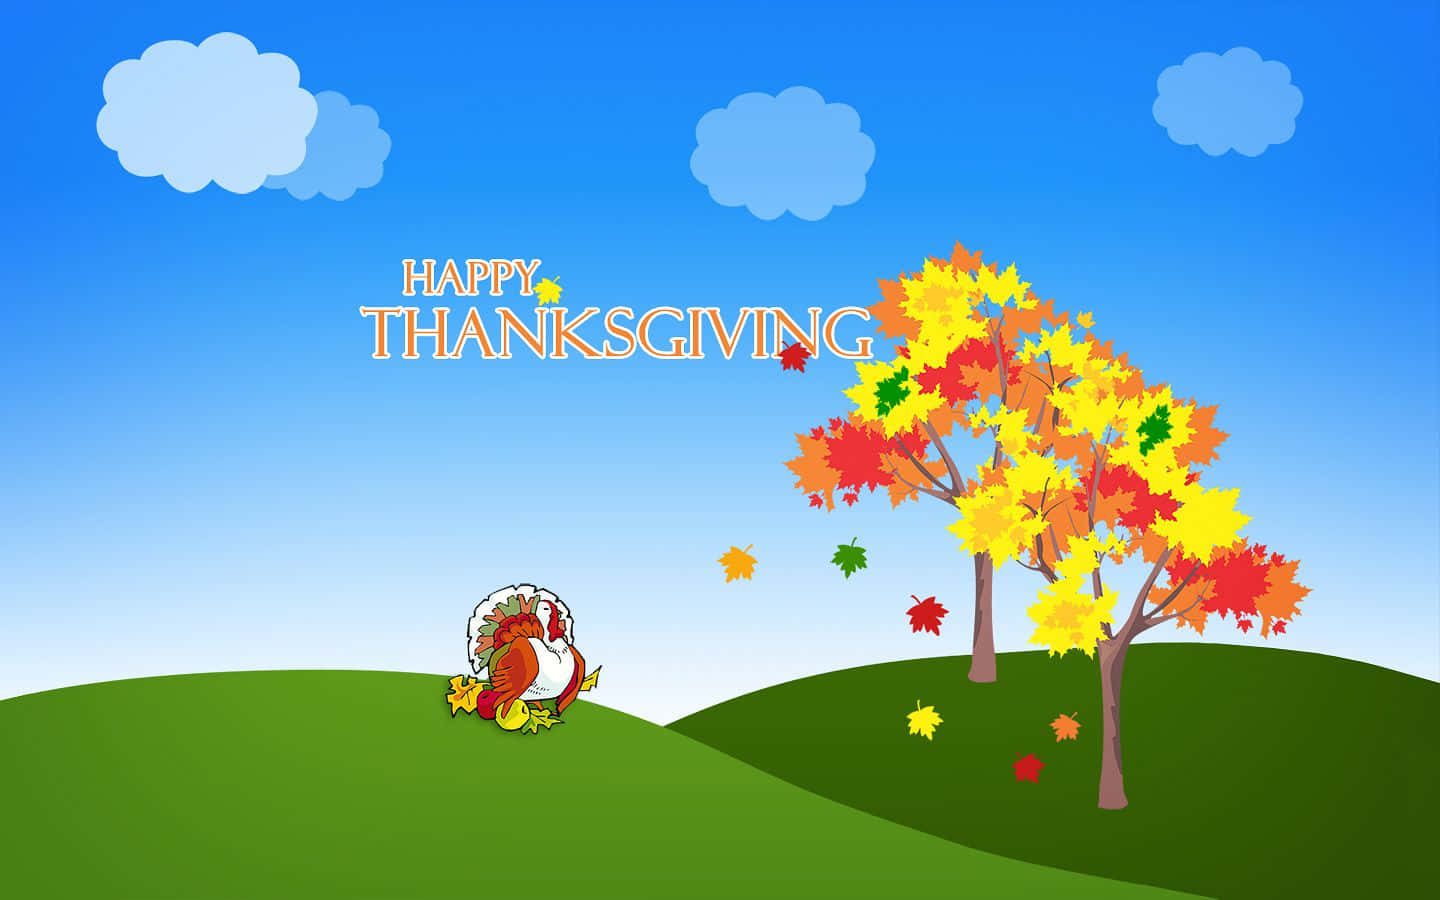 Have A Funny Thanksgiving Holiday With Friends And Family! Background